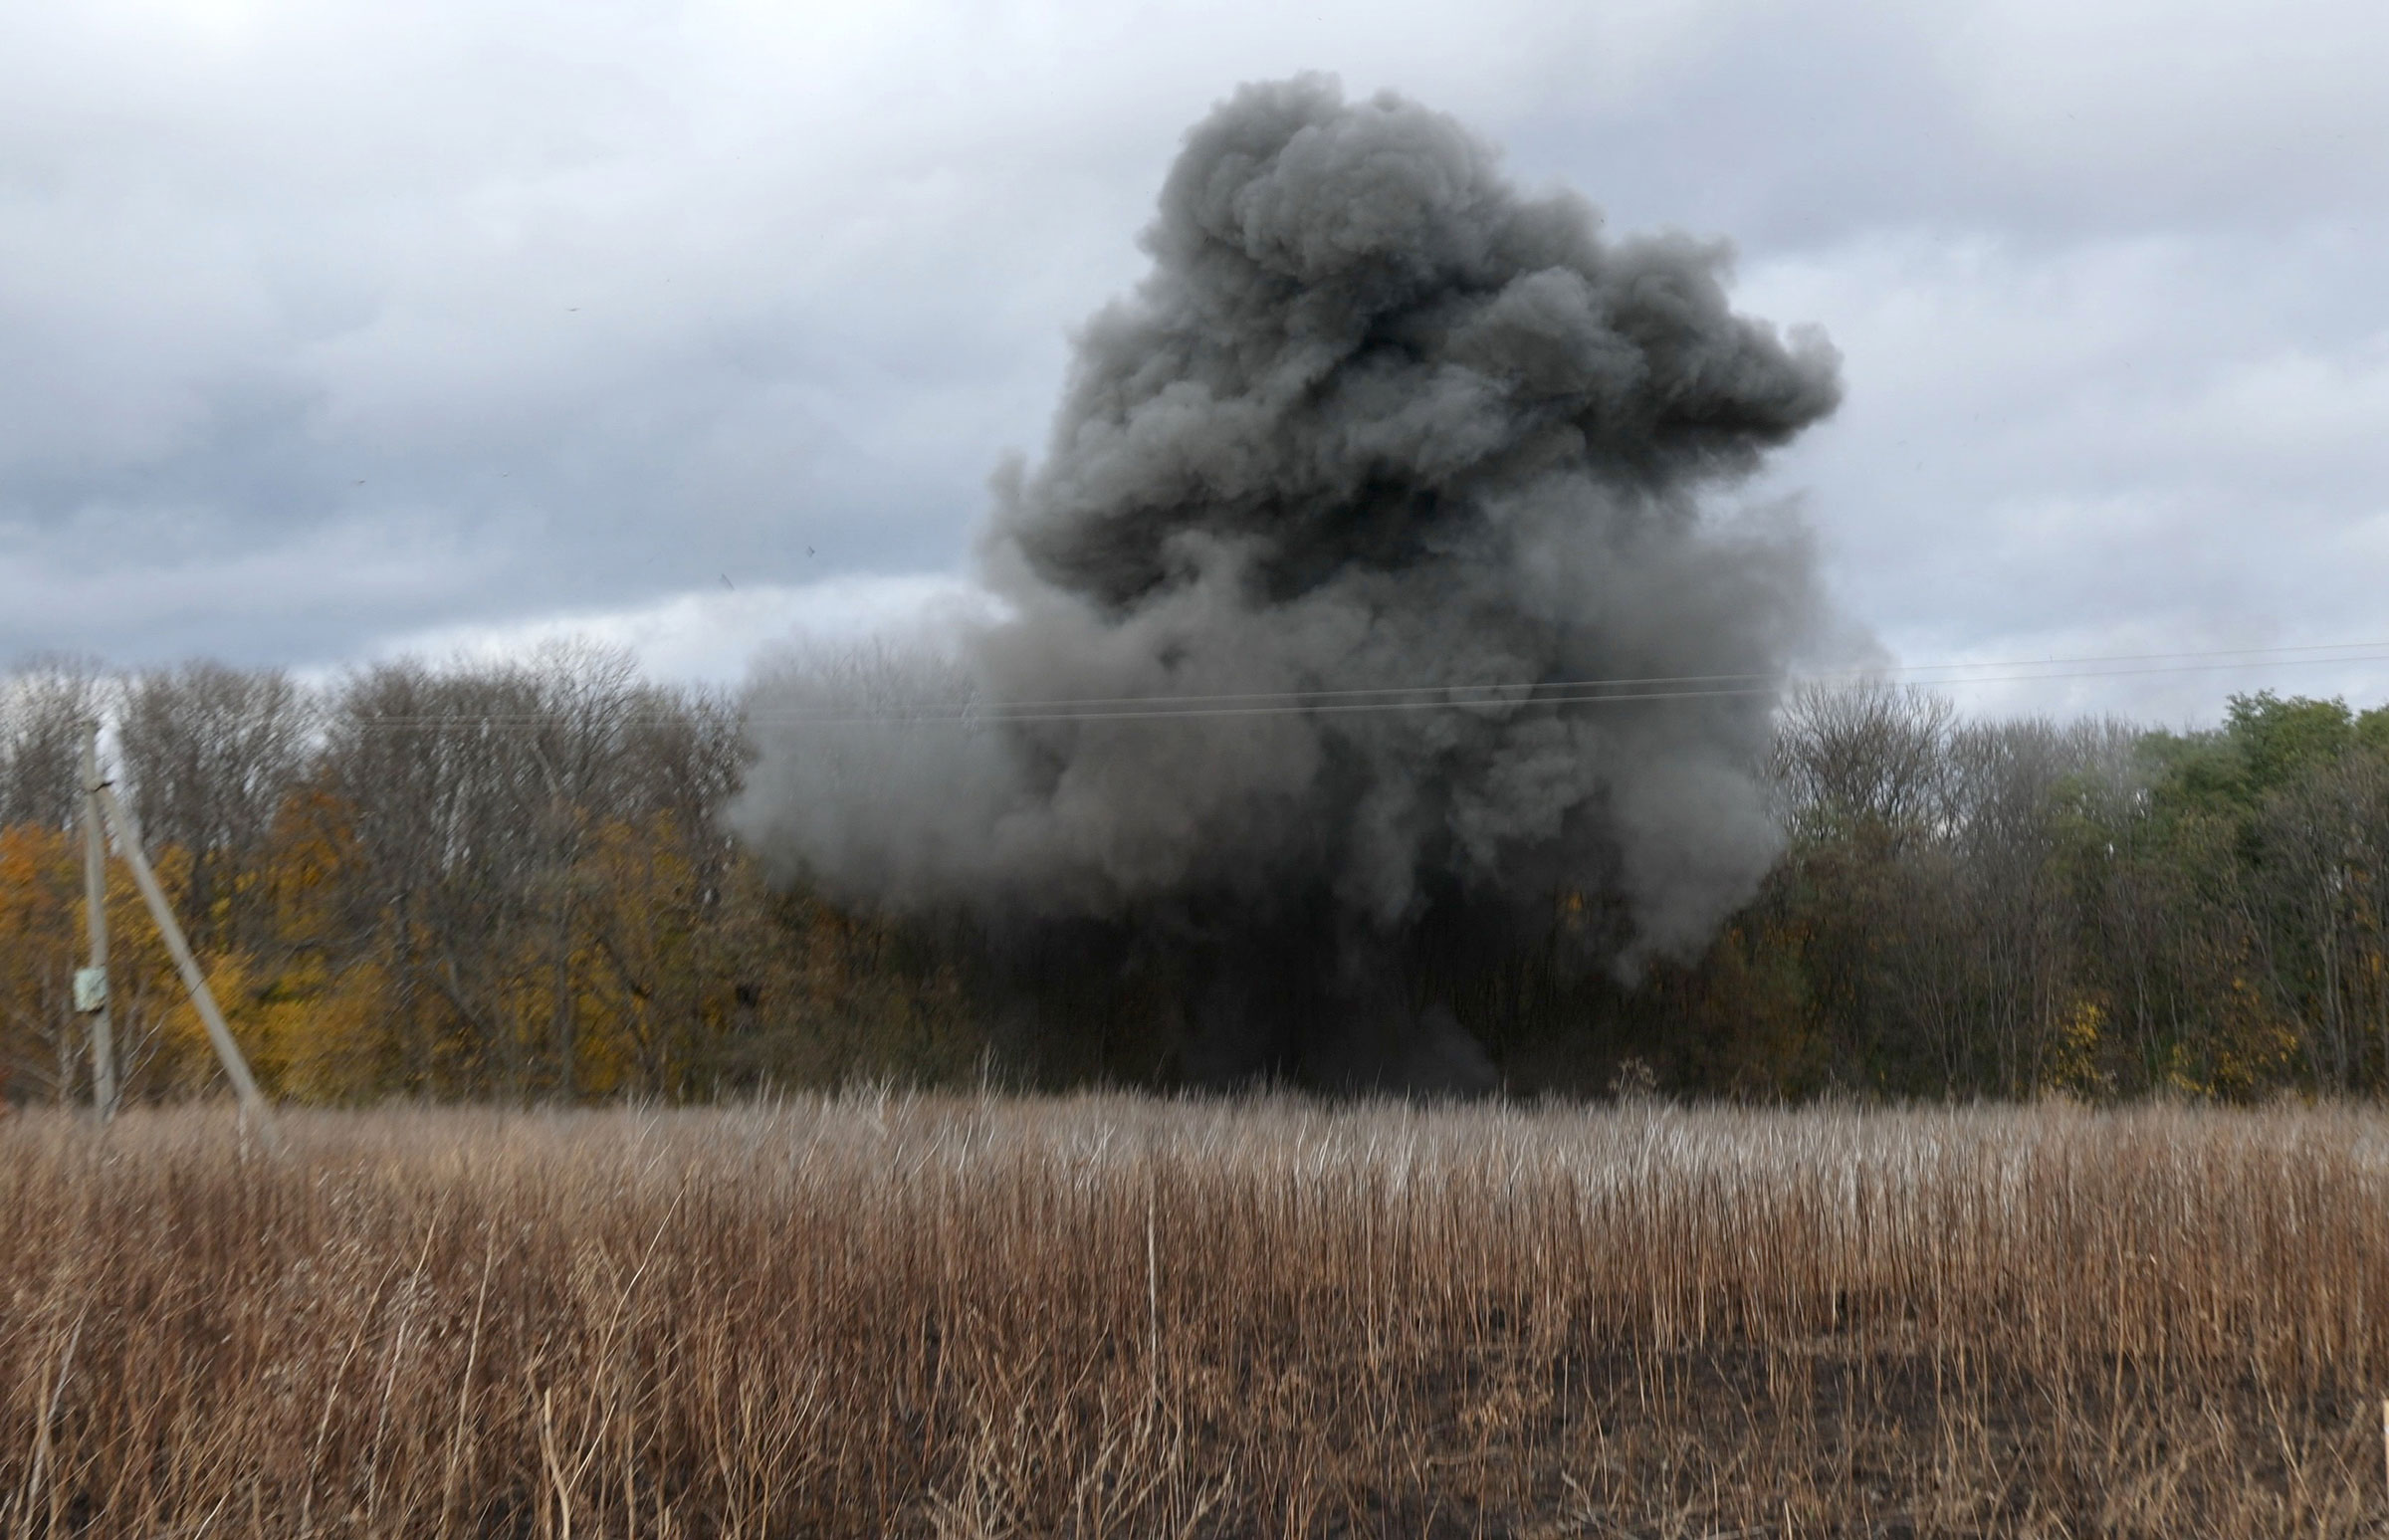 A plume of smoke rises after a controlled explosion as a consolidated squad of the Explosives Service of Ukraine carries out demining work in Kharkiv Region, on Oct. 23, 2023.